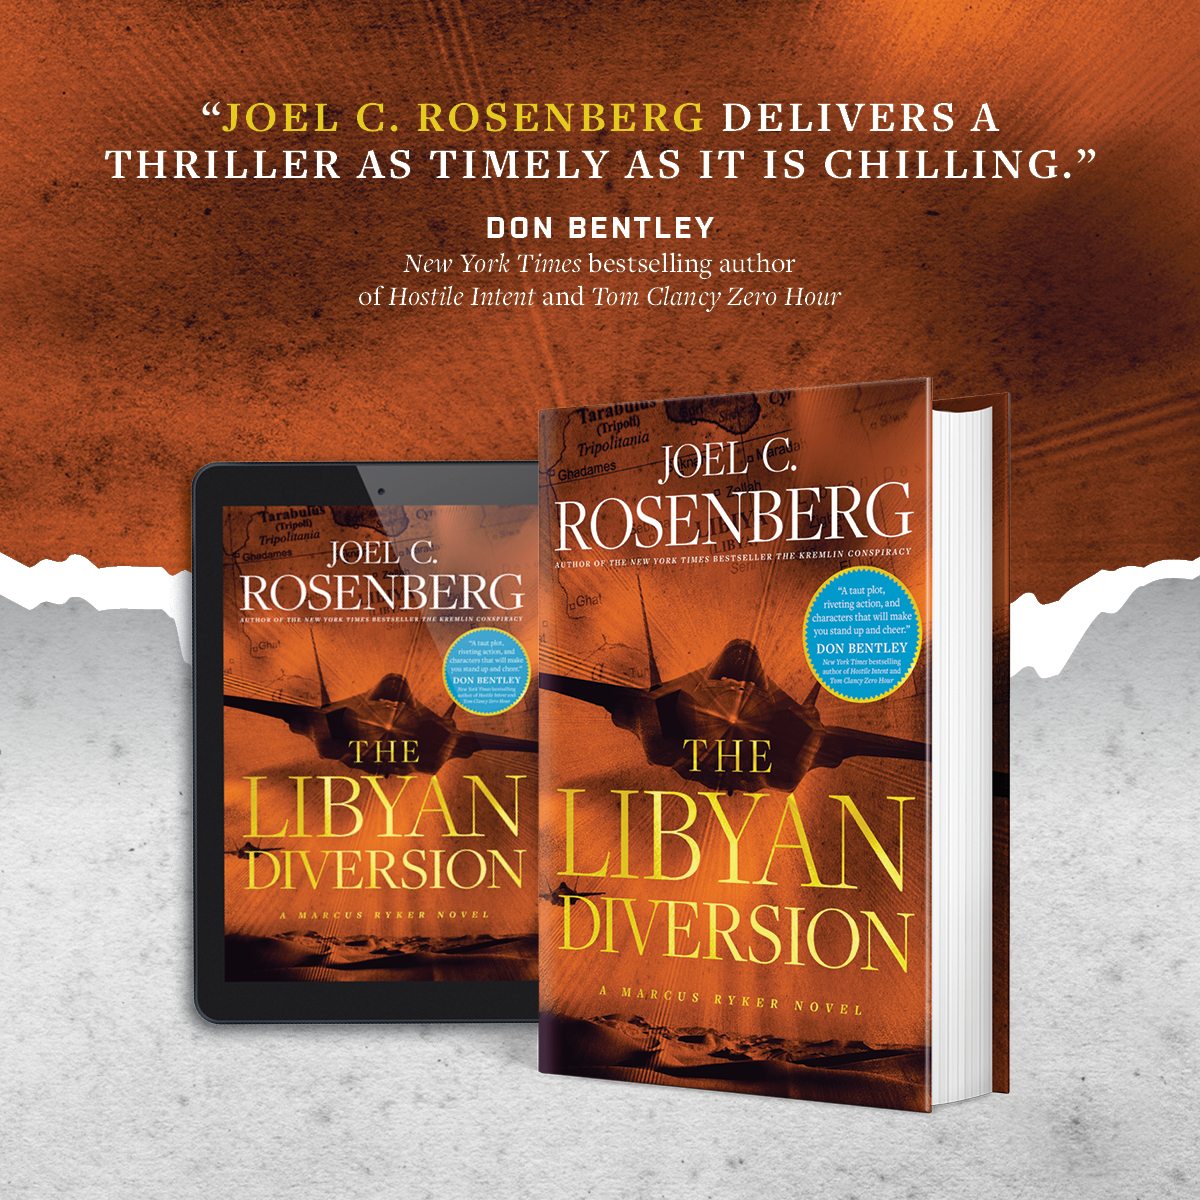 THE LIBYAN DIVERSION by @JoelCRosenberg is now available! The fifth novel in the Marcus Ryker series is a fast-paced thriller that readers won't want to put down. Find THE LIBYAN DIVERSION wherever books are sold: bit.ly/3W6XutA #politicalthriller #militaryfiction